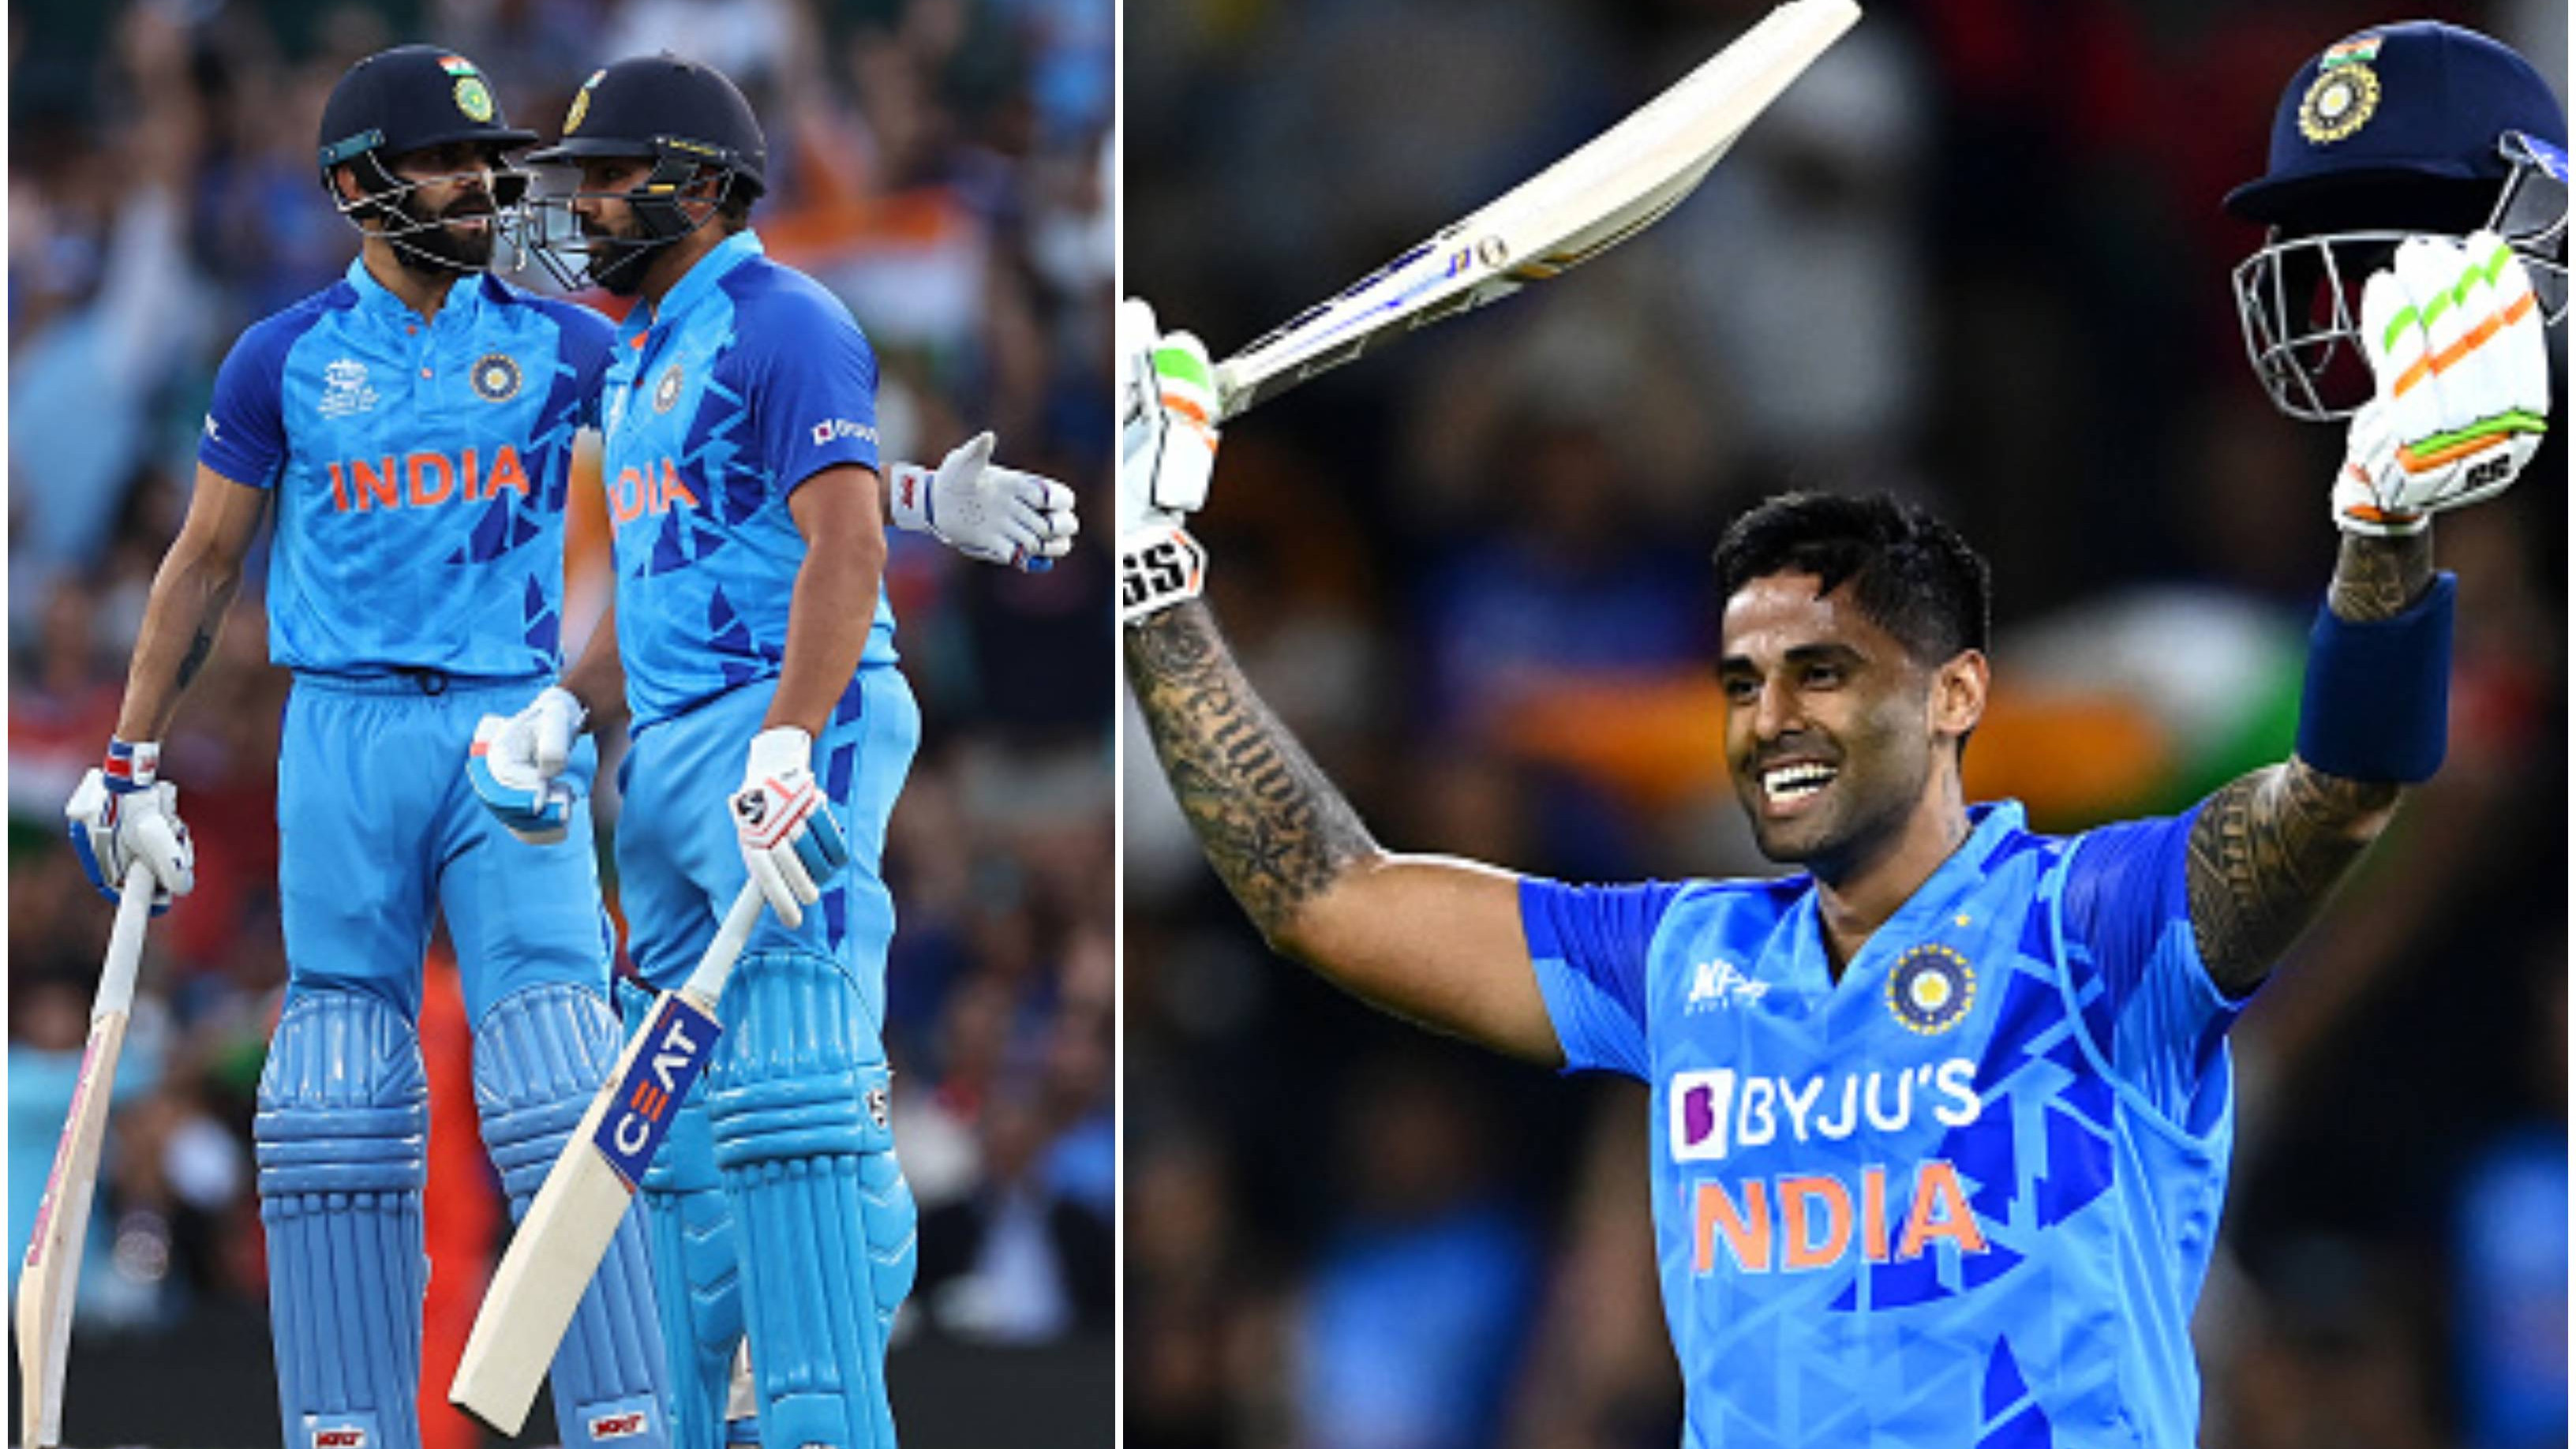 “They are a different breed of international cricketers,” Suryakumar Yadav lucky to share dressing room with Kohli and Rohit